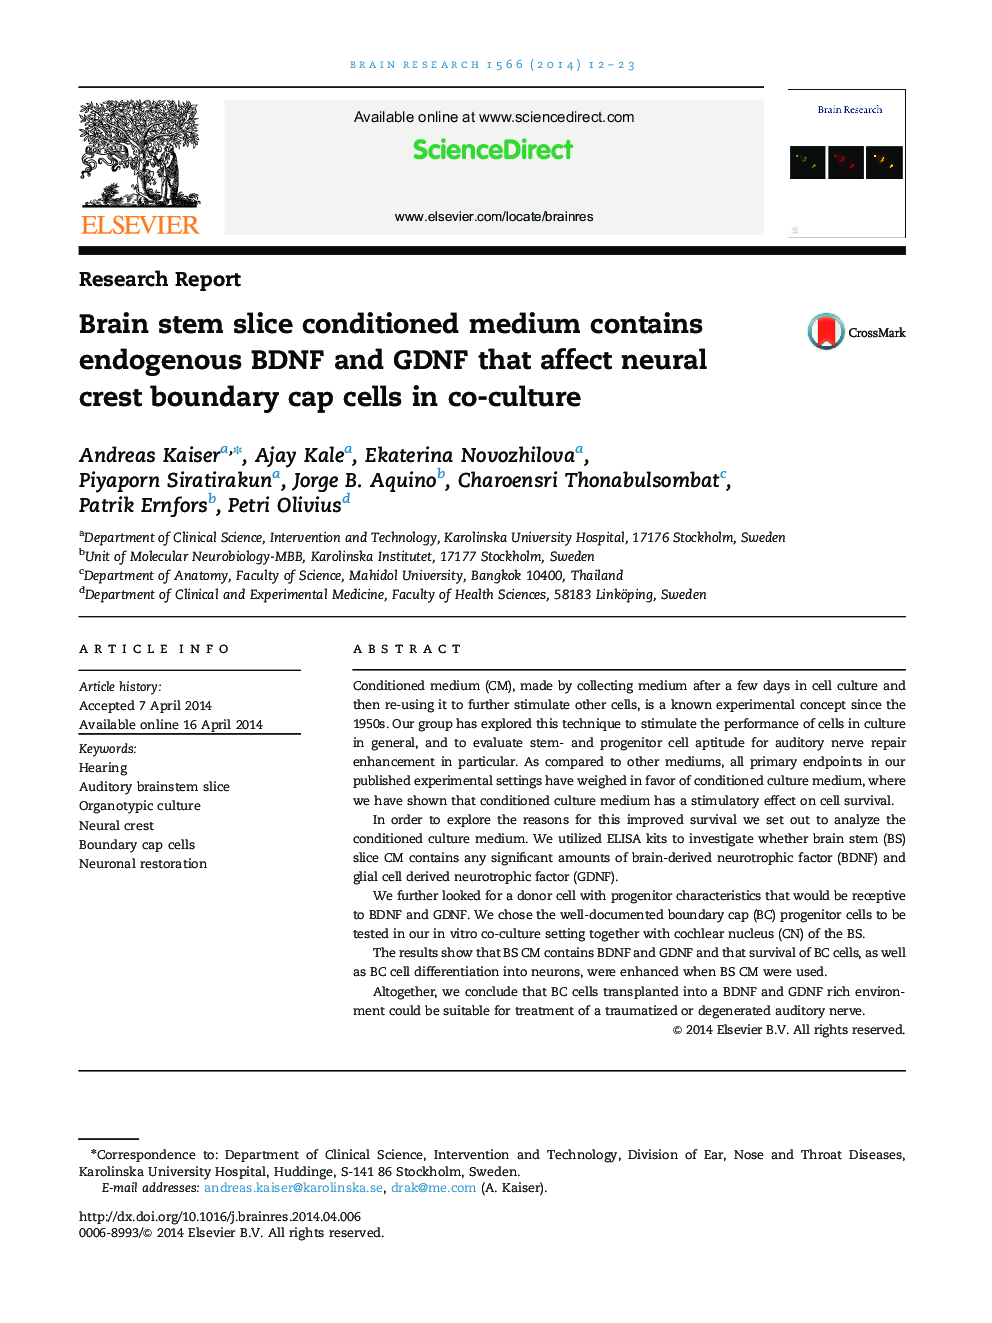 Brain stem slice conditioned medium contains endogenous BDNF and GDNF that affect neural crest boundary cap cells in co-culture